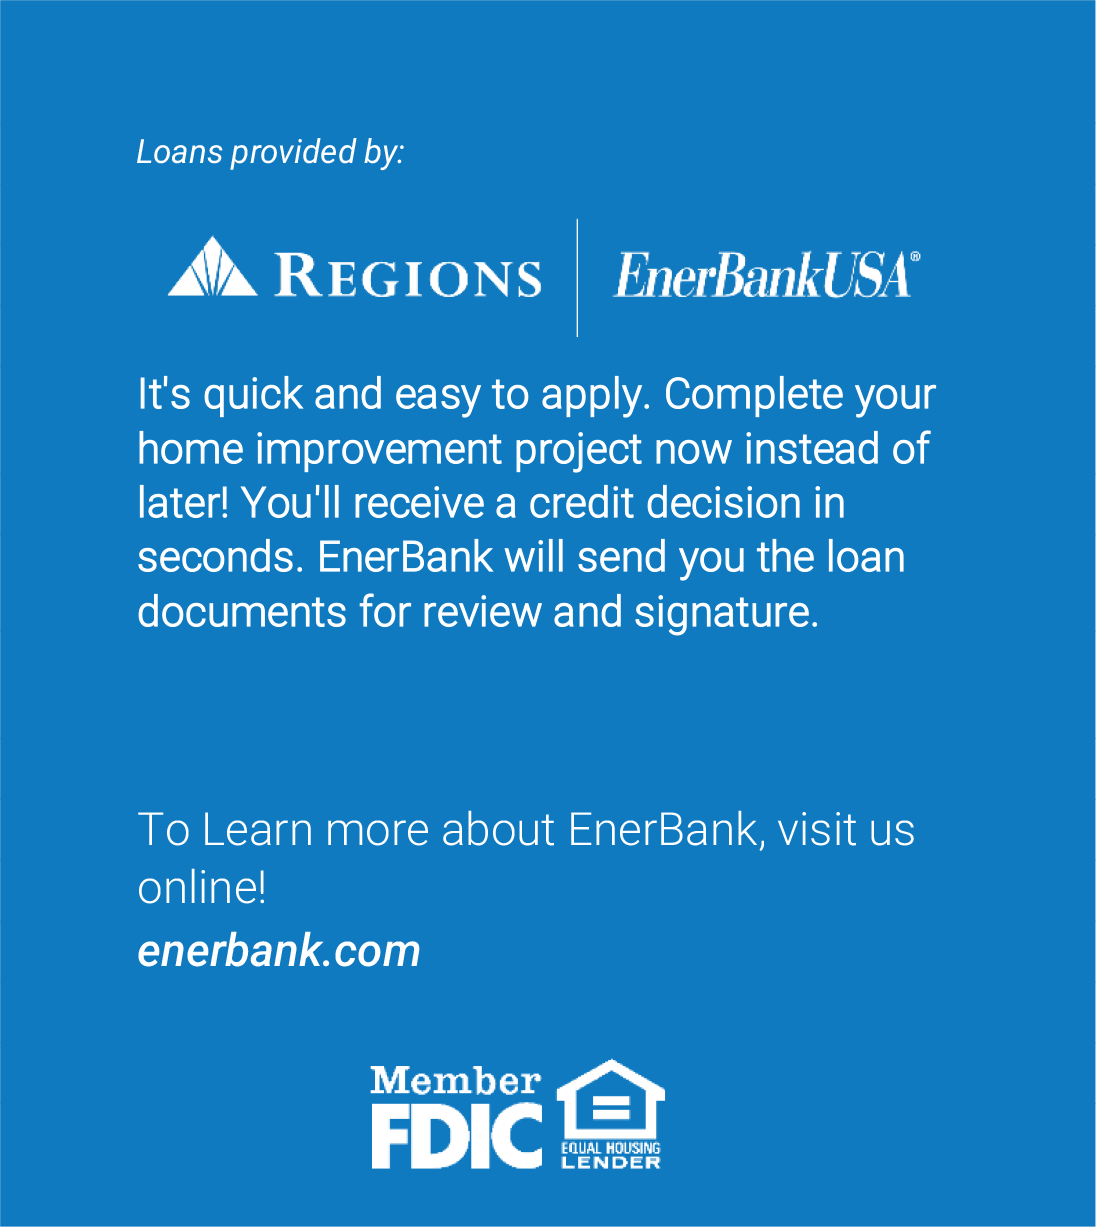 A short ad for EnerBankUSA and a URL for their website 